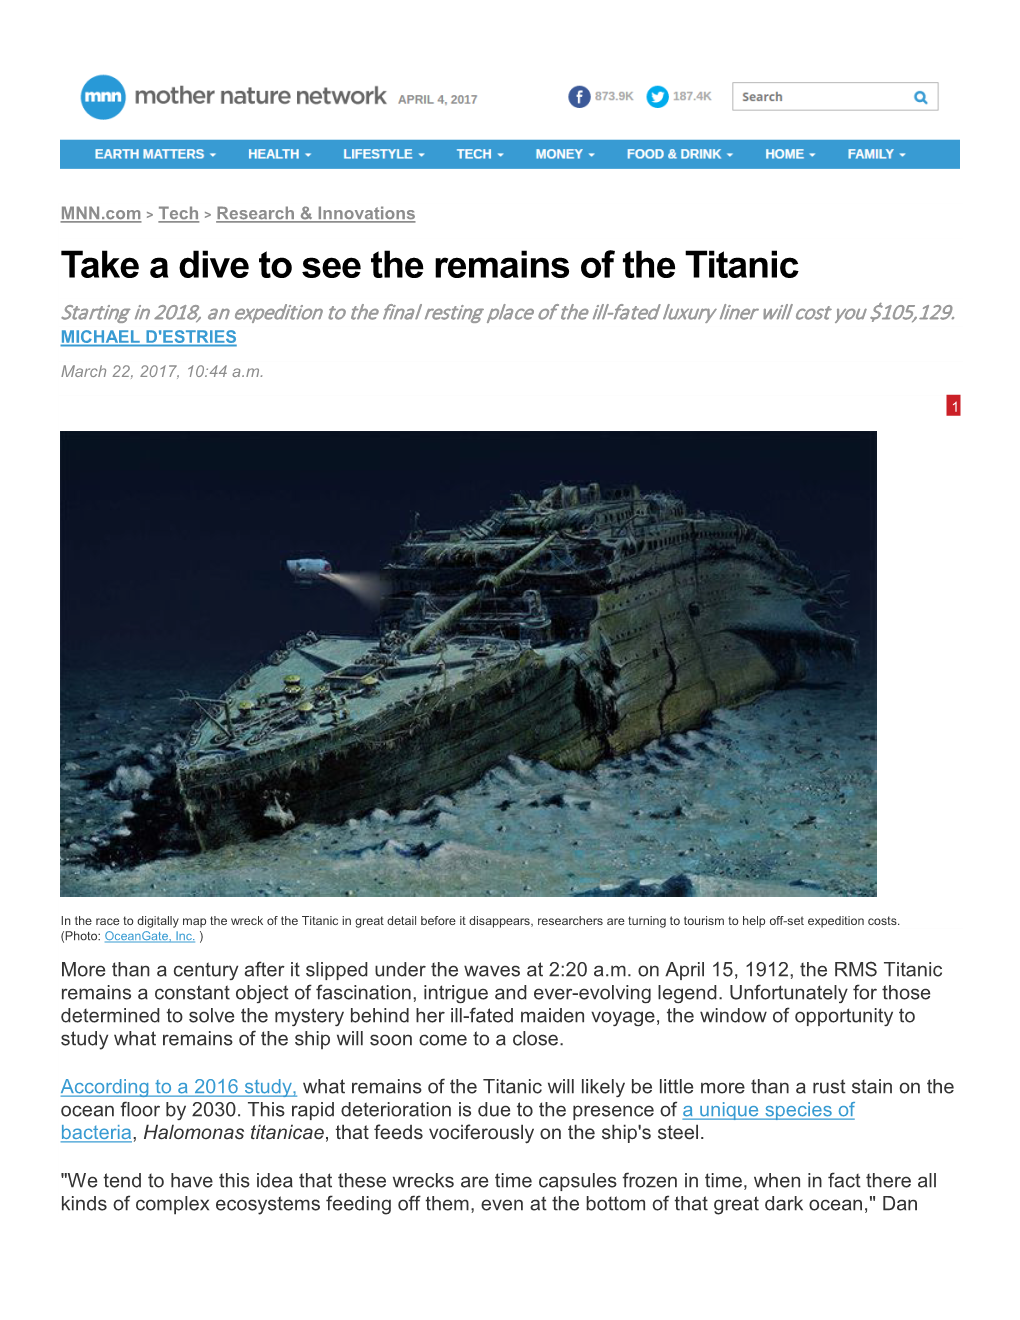 Take a Dive to See the Remains of the Titanic Starting in 2018, an Expedition to the Final Resting Place of the Ill-Fated Luxury Liner Will Cost You $105,129